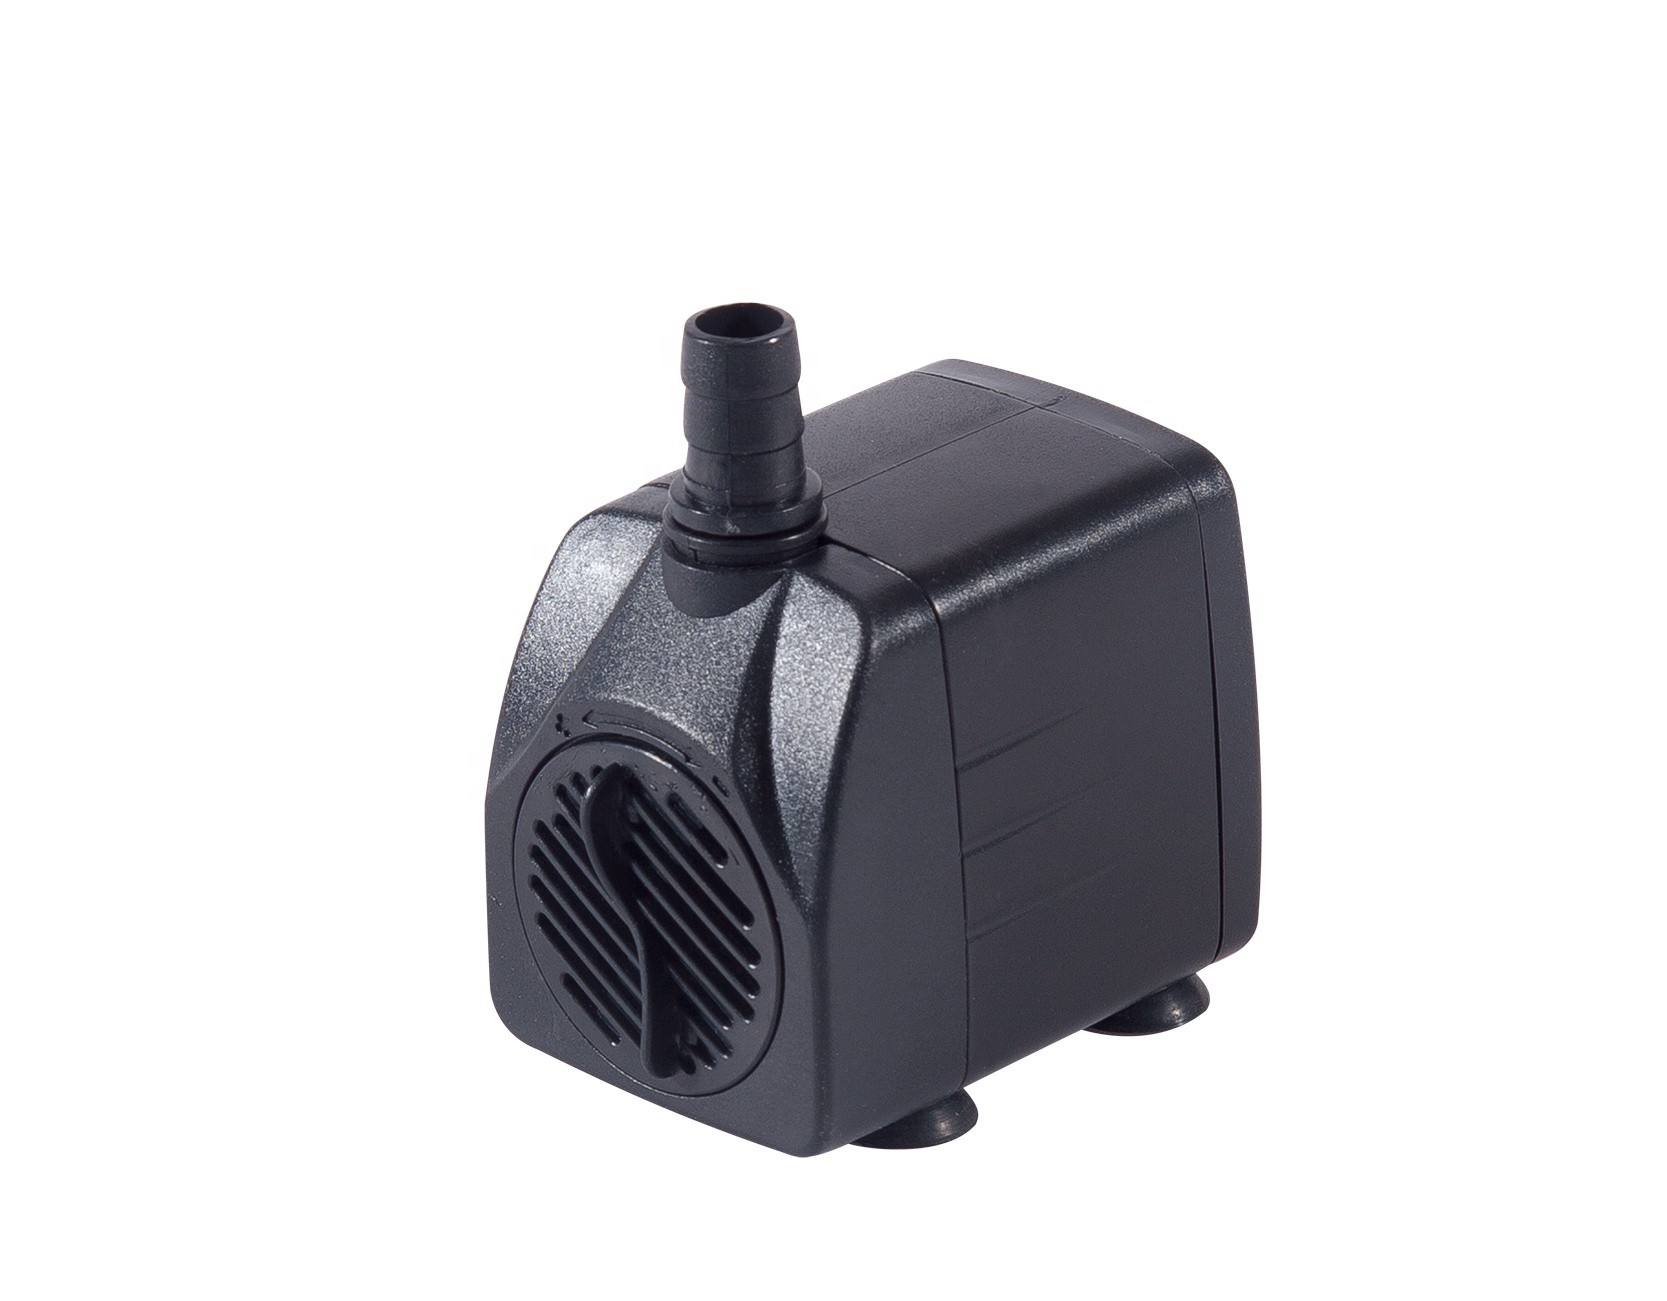 Pump Factory China Manufacture 25W Mini Floor Spray Cooling Fan Cooler Submersible Water Pump